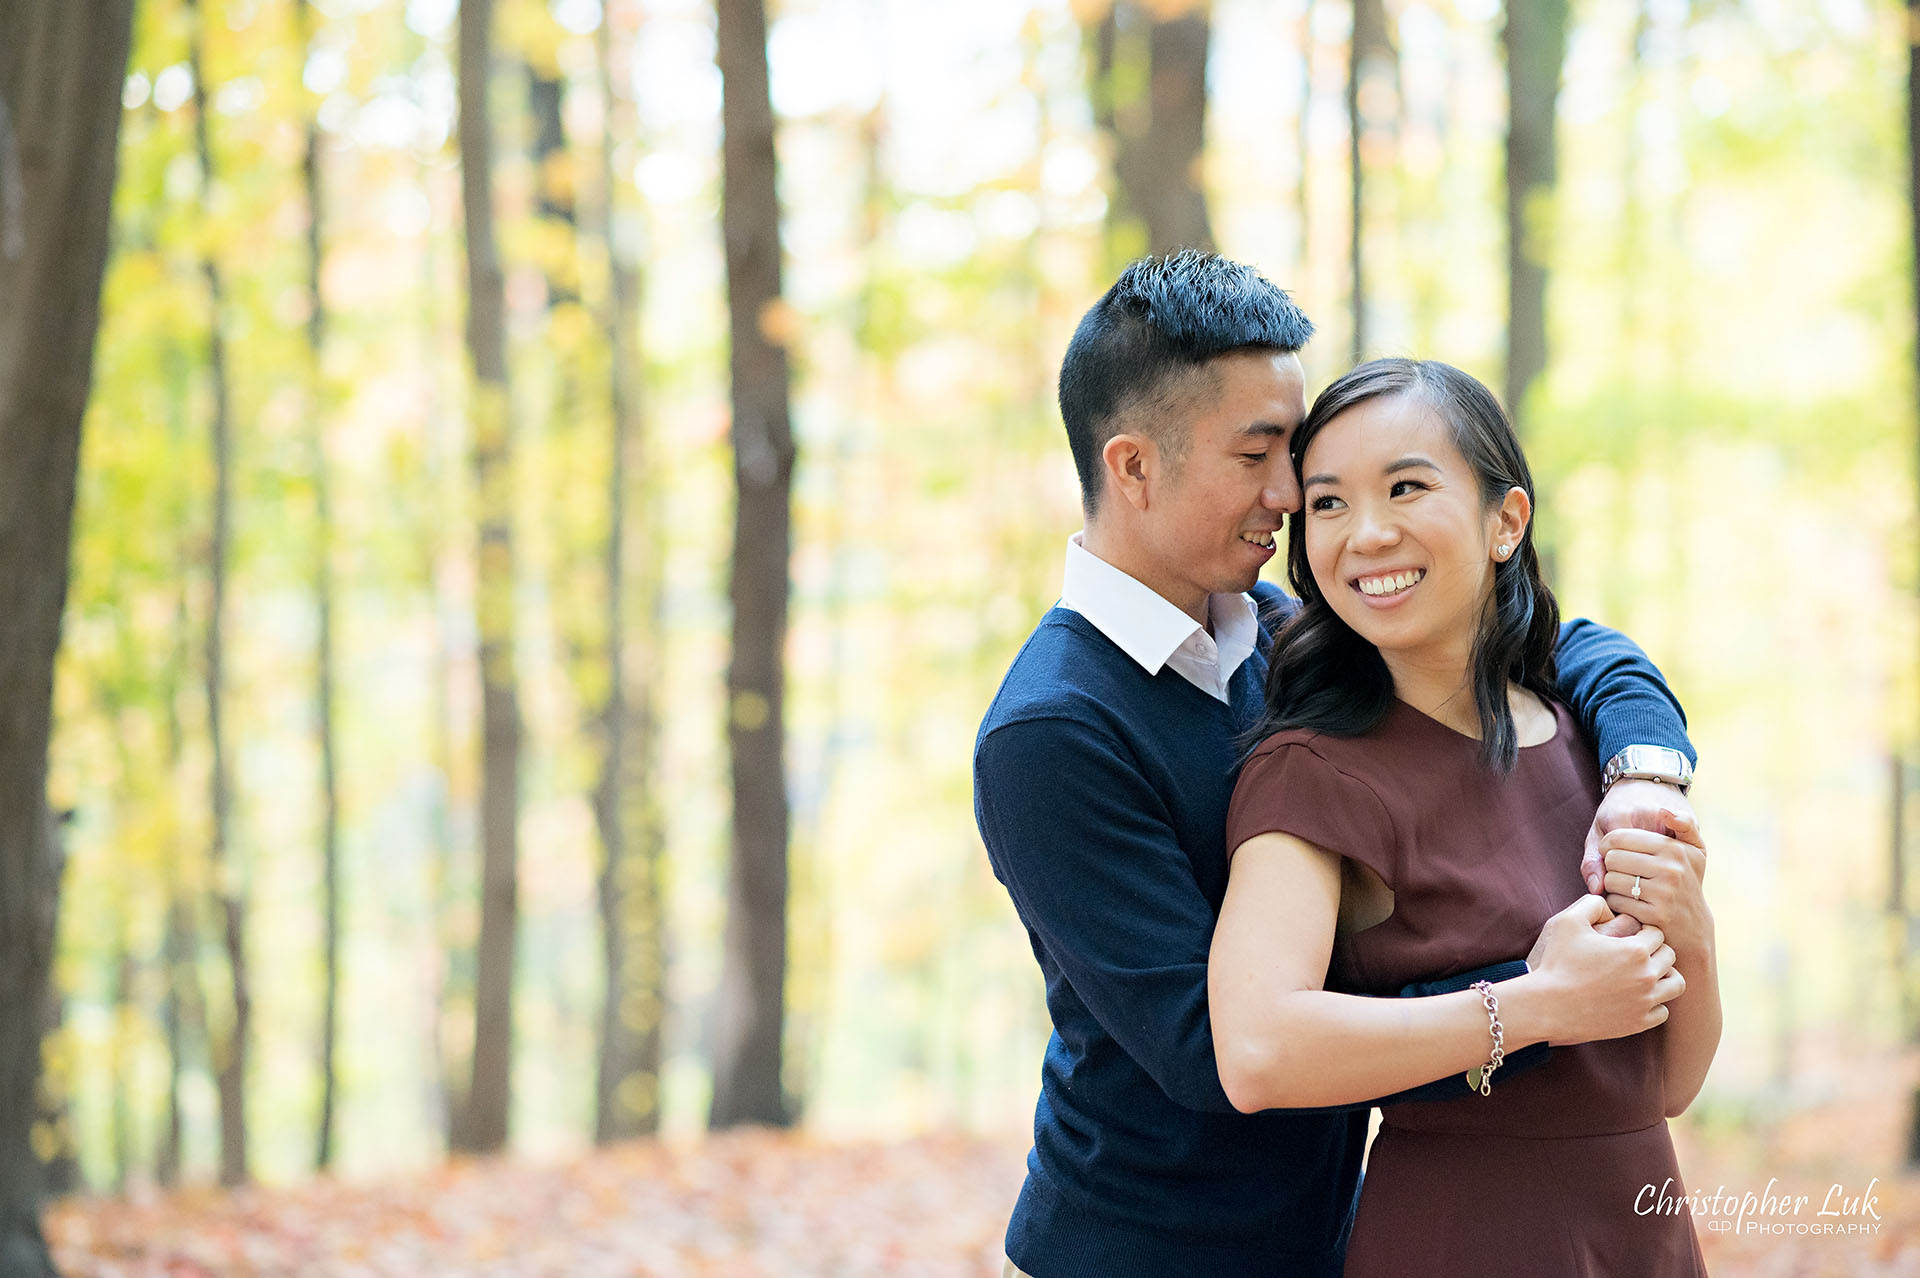 Christopher Luk Toronto Wedding Engagement Session Photographer Autumn Fall Leaves Natural Candid Photojournalistic Bride Groom Hiking Trail Trees Smiling Hug Hugging Each Other Happy Together